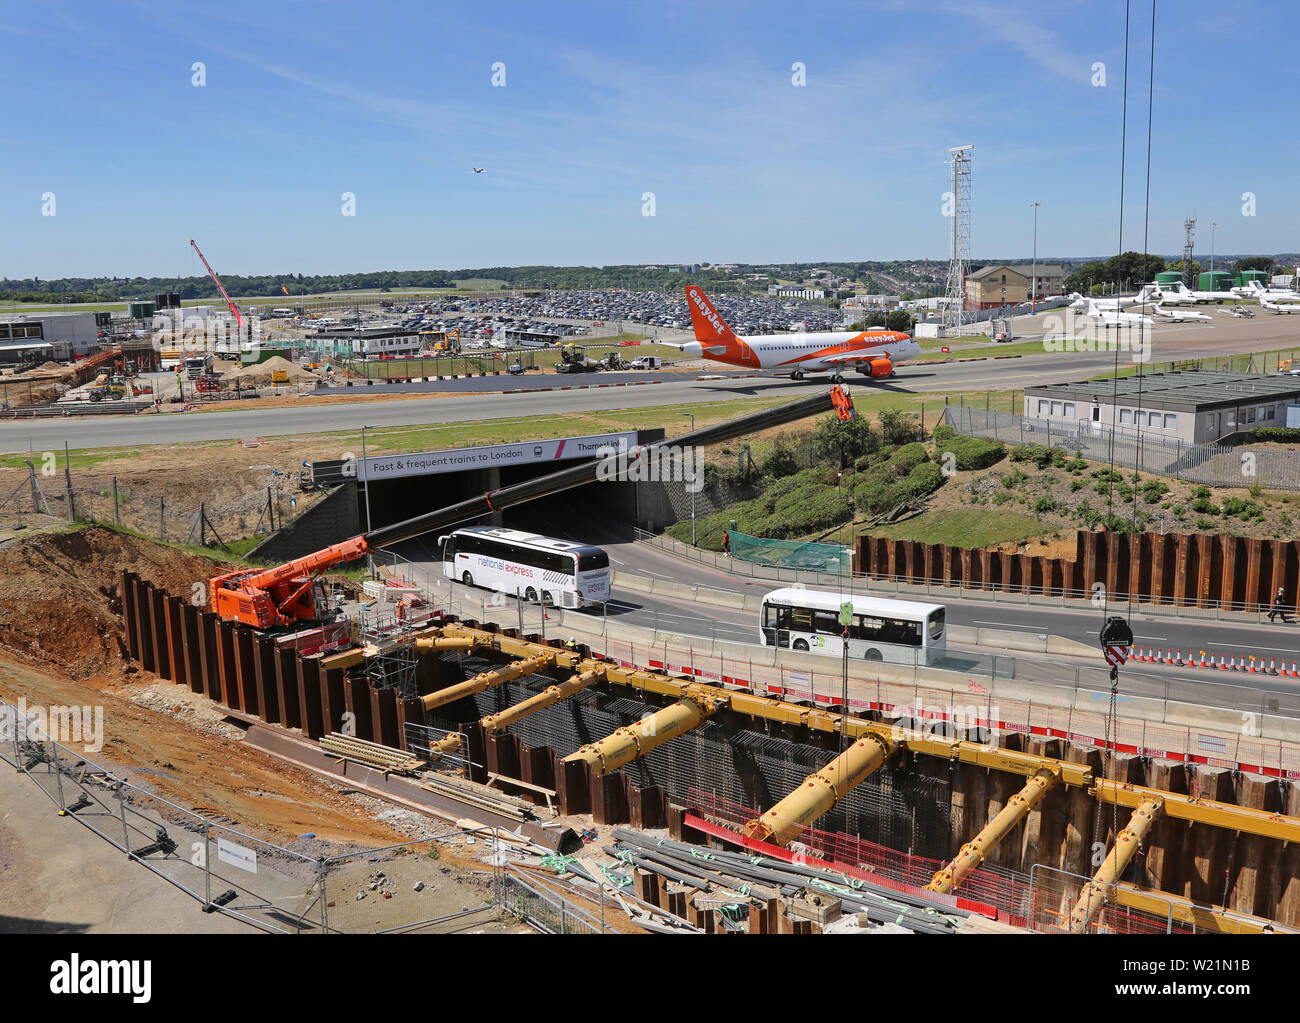 London Luton Airport, UK. Excavation for the new DART rail link. Also shows main access road beneath airport taxiway with Easyjet plane passing. Stock Photo